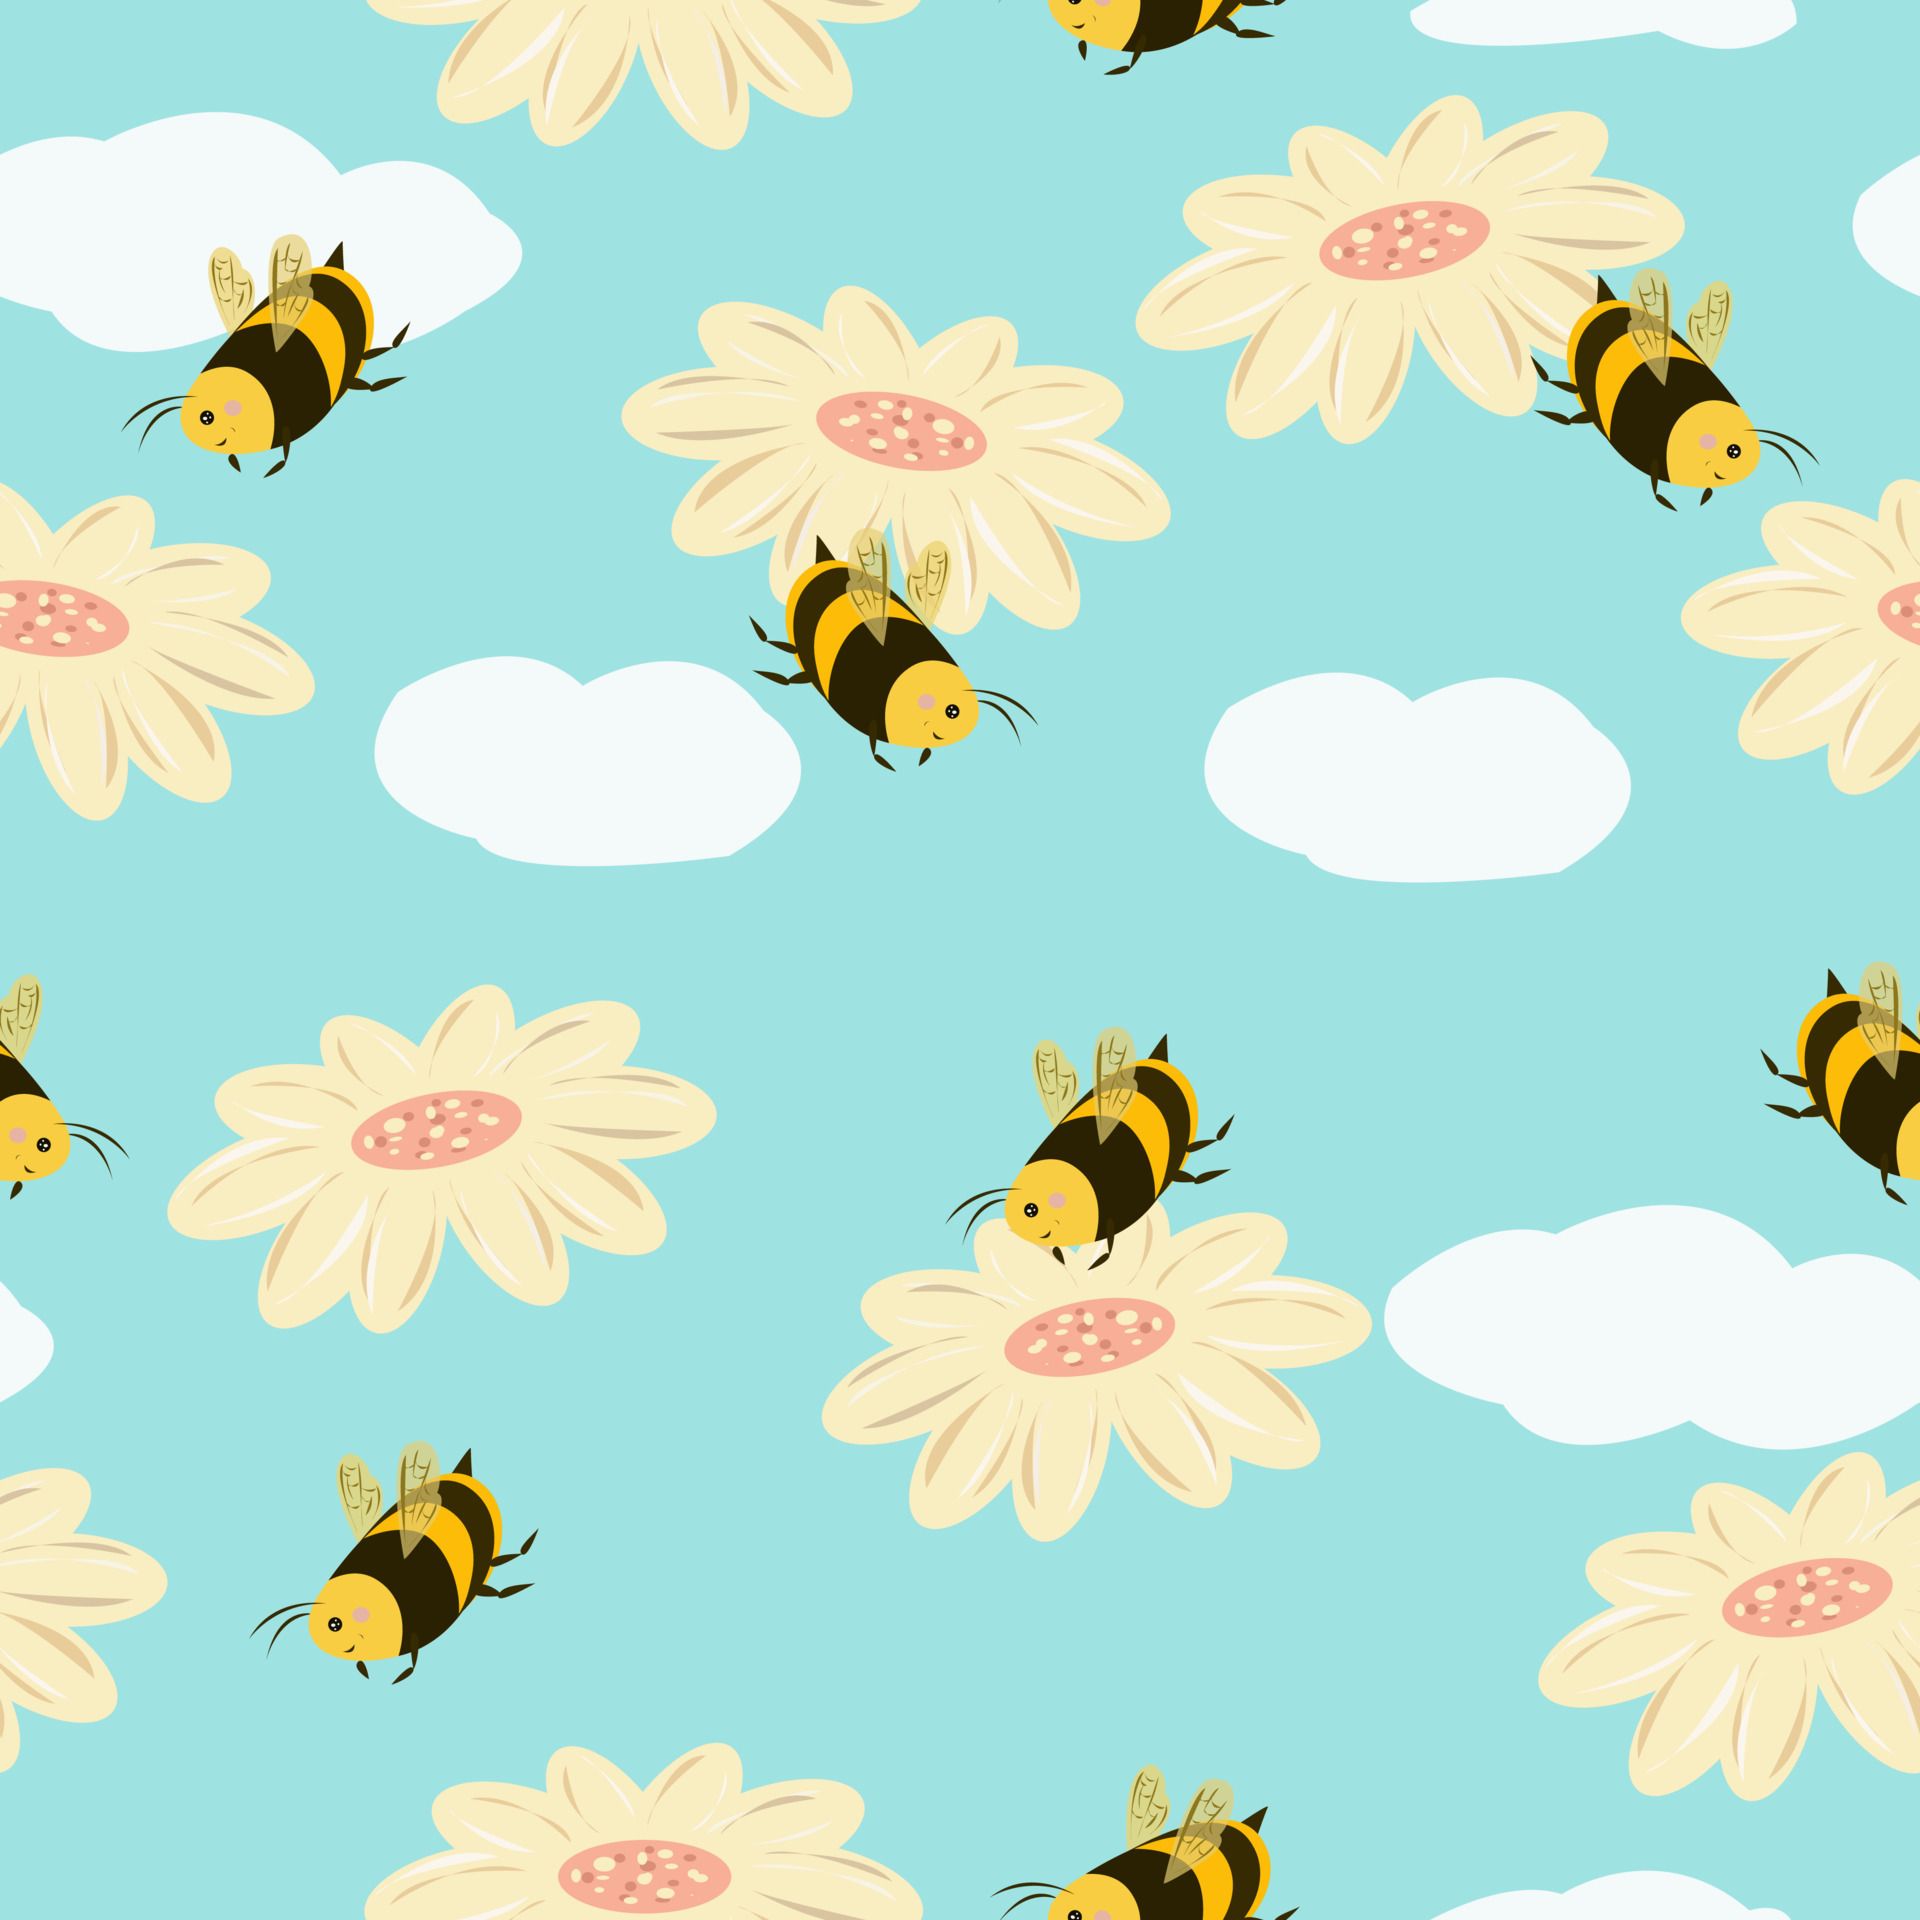 Seamless pattern of funny bees and daisies with clouds